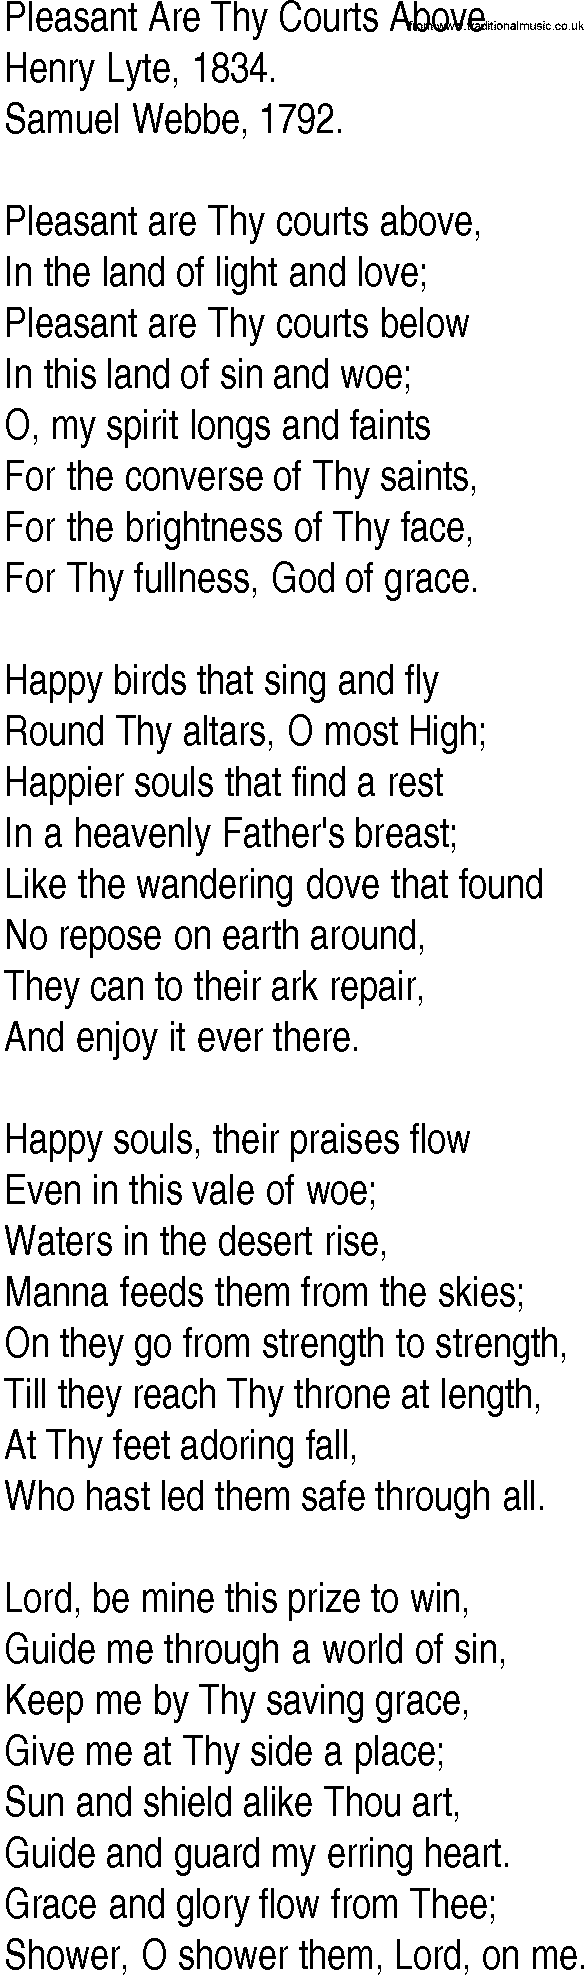 Hymn and Gospel Song: Pleasant Are Thy Courts Above by Henry Lyte lyrics